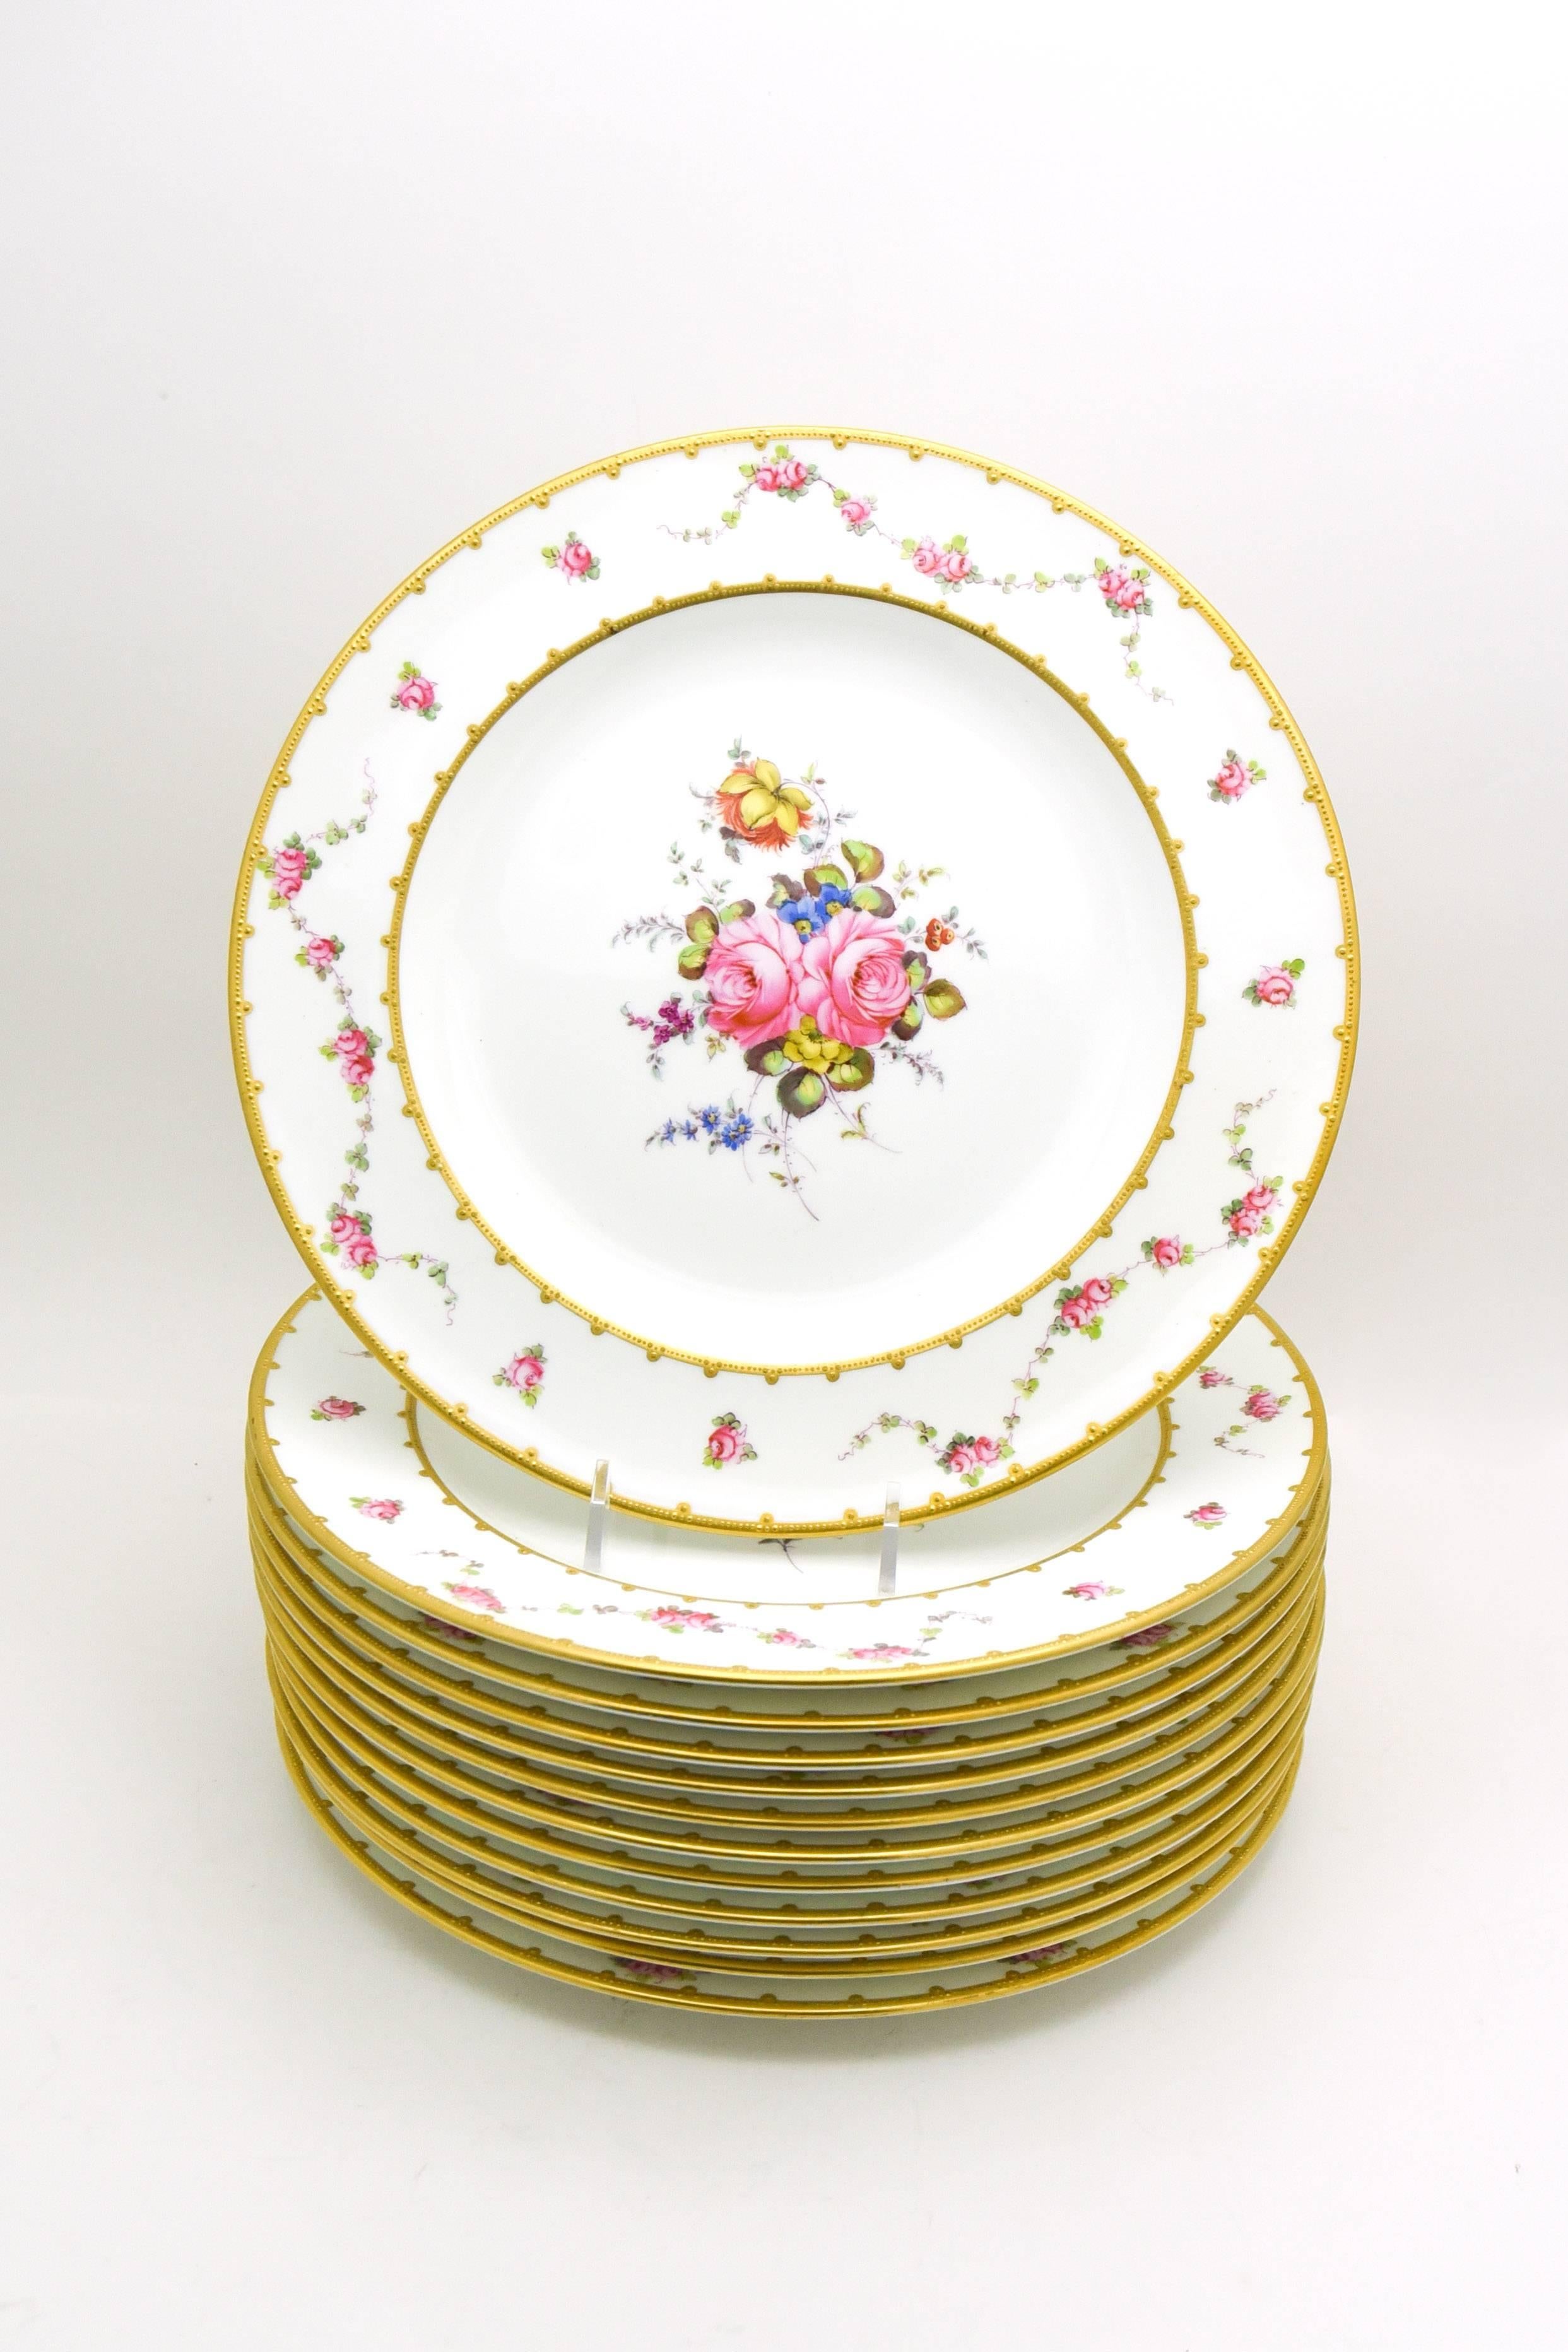 This set is a great example of the iconic artistry and style of Royal Crown Derby.
These plates are embellished with swags of vibrant hand-painted roses and two bands of acid etched gold with delicate raised paste 